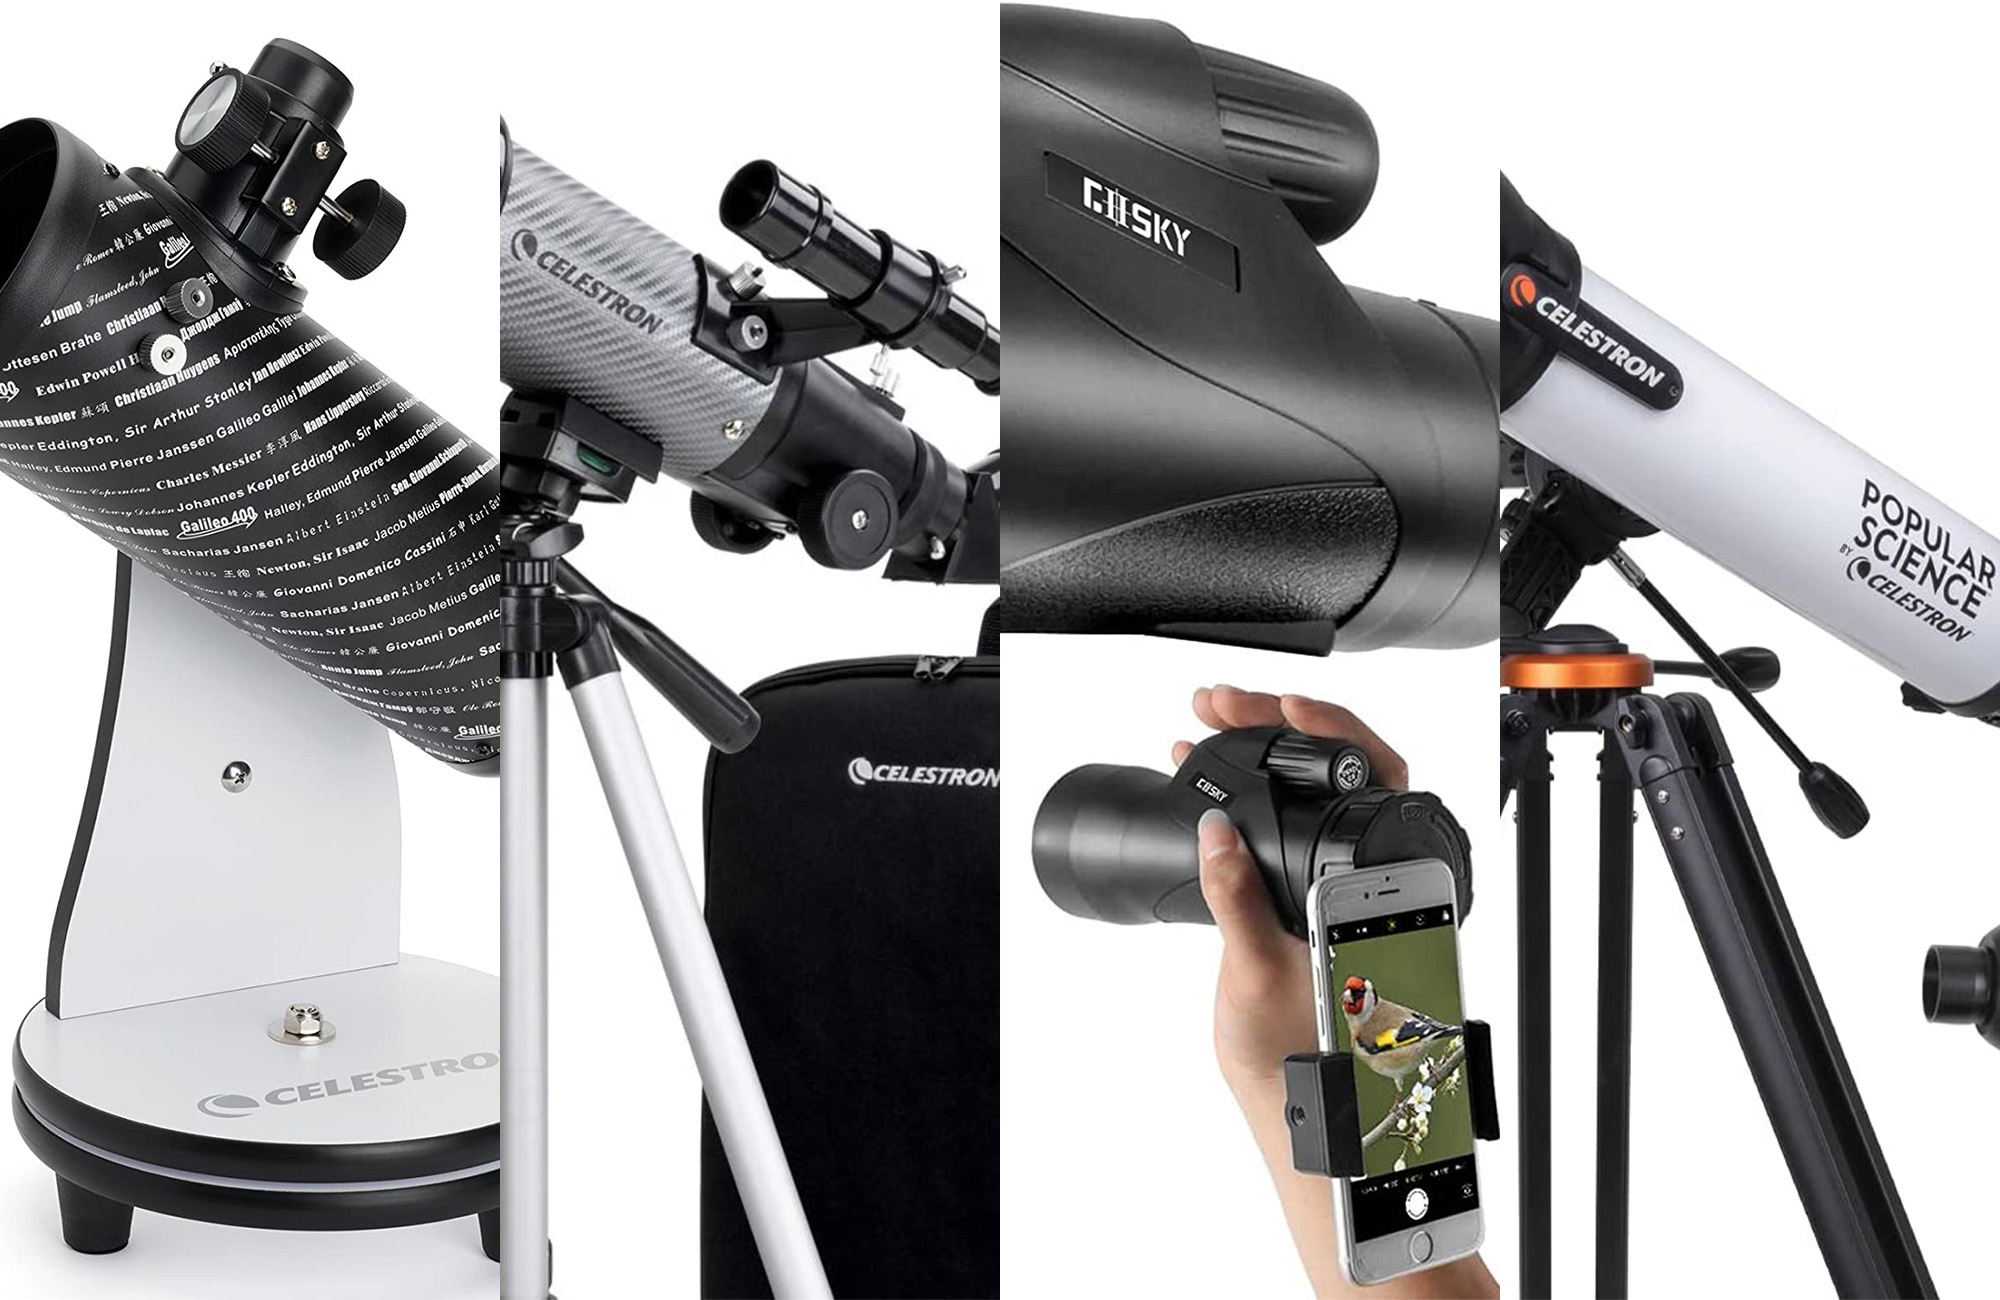 These 20+ Black Friday telescope deals will show you the universe